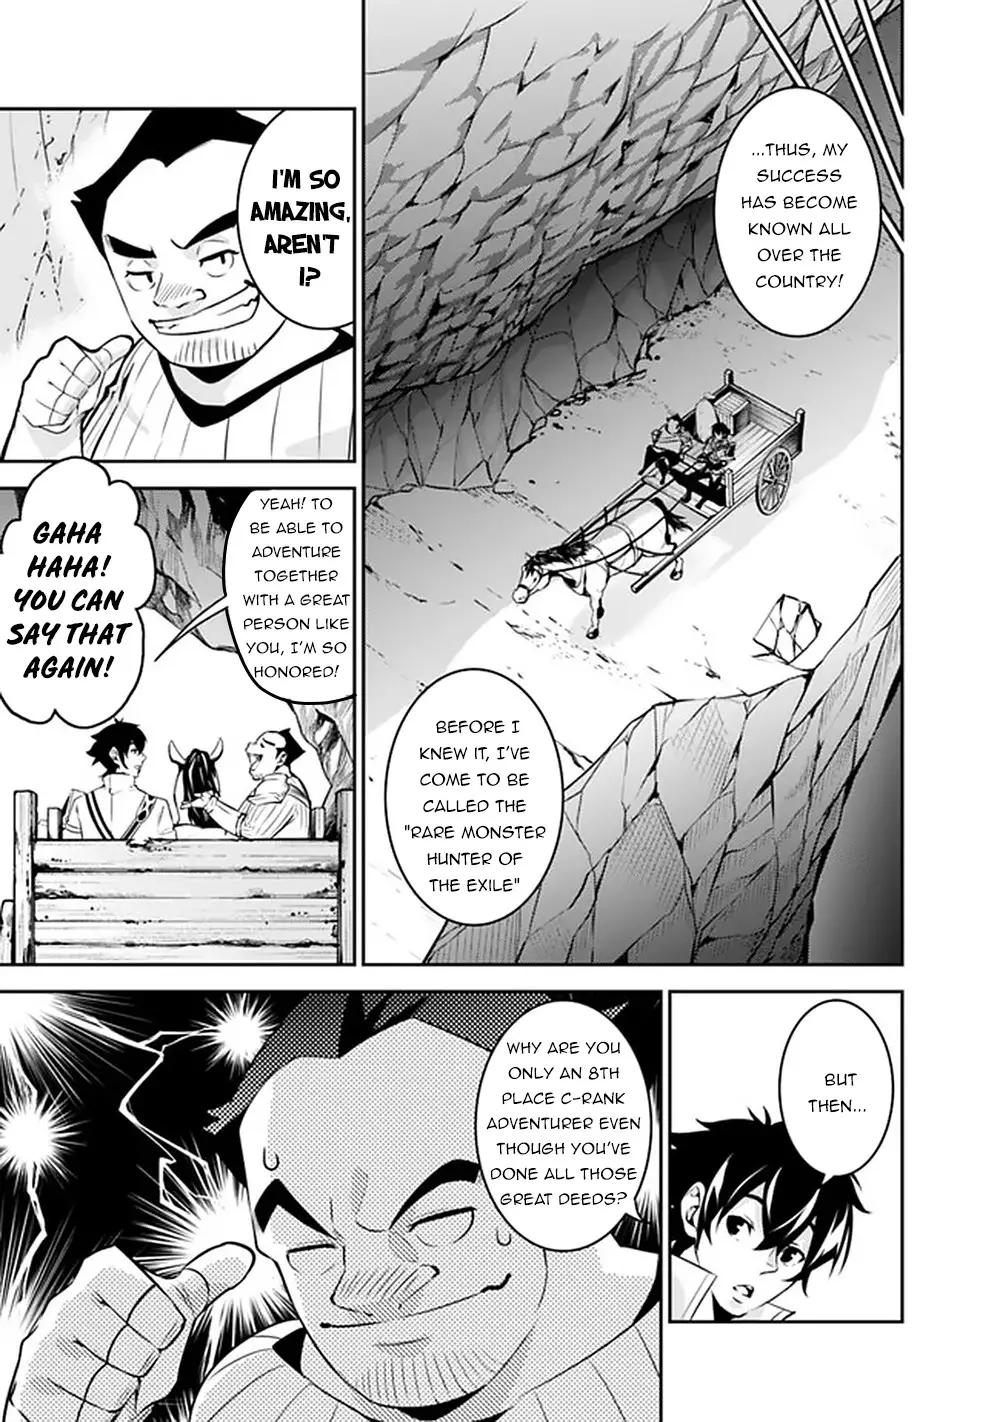 The Strongest Magical Swordsman Ever Reborn As An F-Rank Adventurer. - 38 page 6